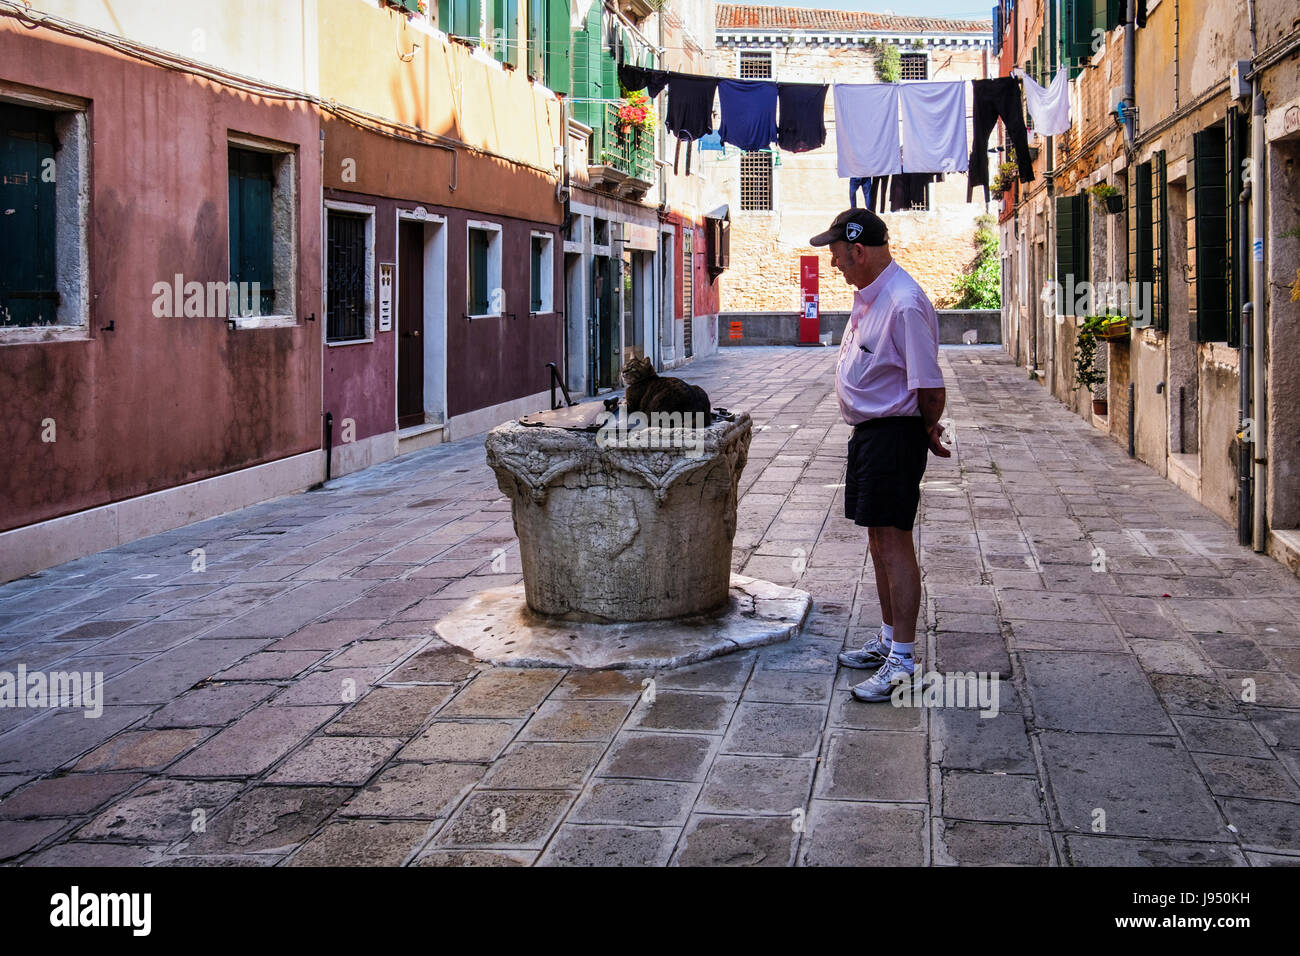 Venice,Castello. Narrow picturesque street with weathered houses,old water well, washing lines,laundry day and senior man with cat Stock Photo